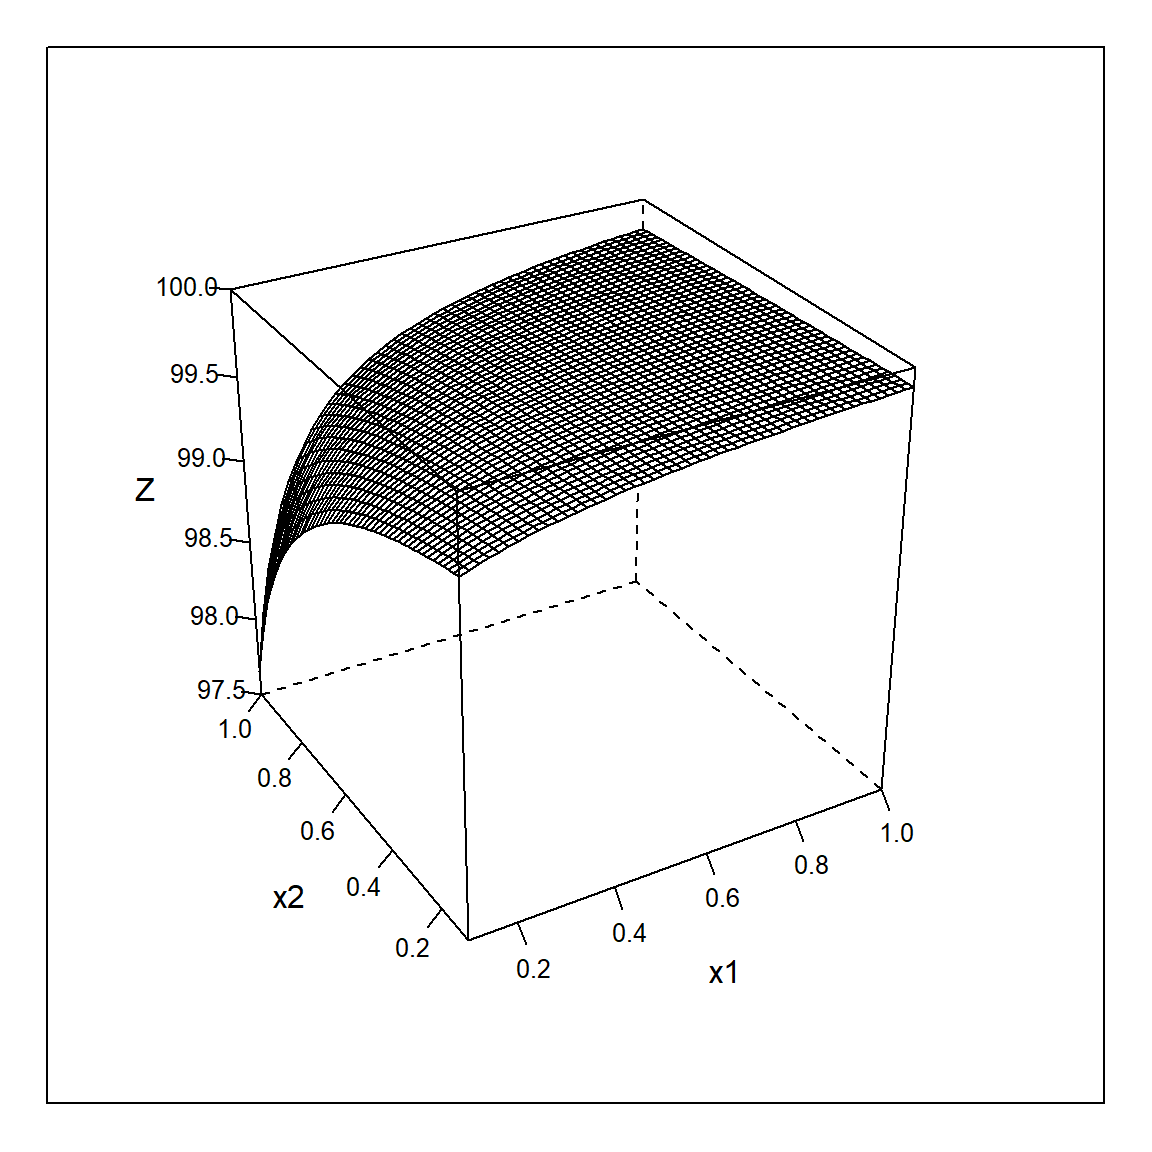 Wireframe plot of the "true" derived response $Z=100 - \frac{f_{1}}{f_{2}}$ as a function of $x_{1},x_{2}$.